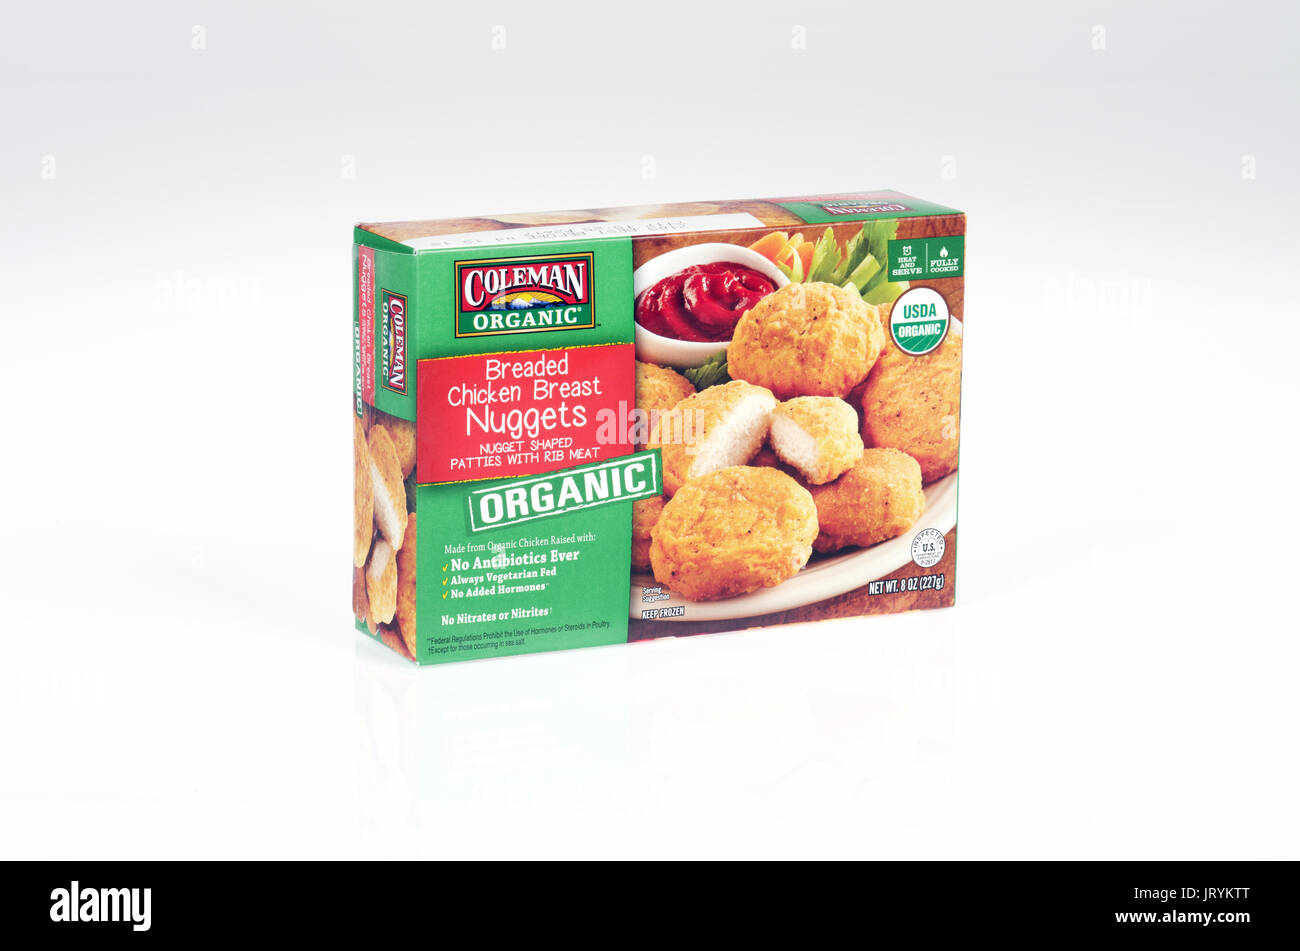 Unopened box of  Coleman Organic frozen chicken nuggets on white background, USA. Stock Photo